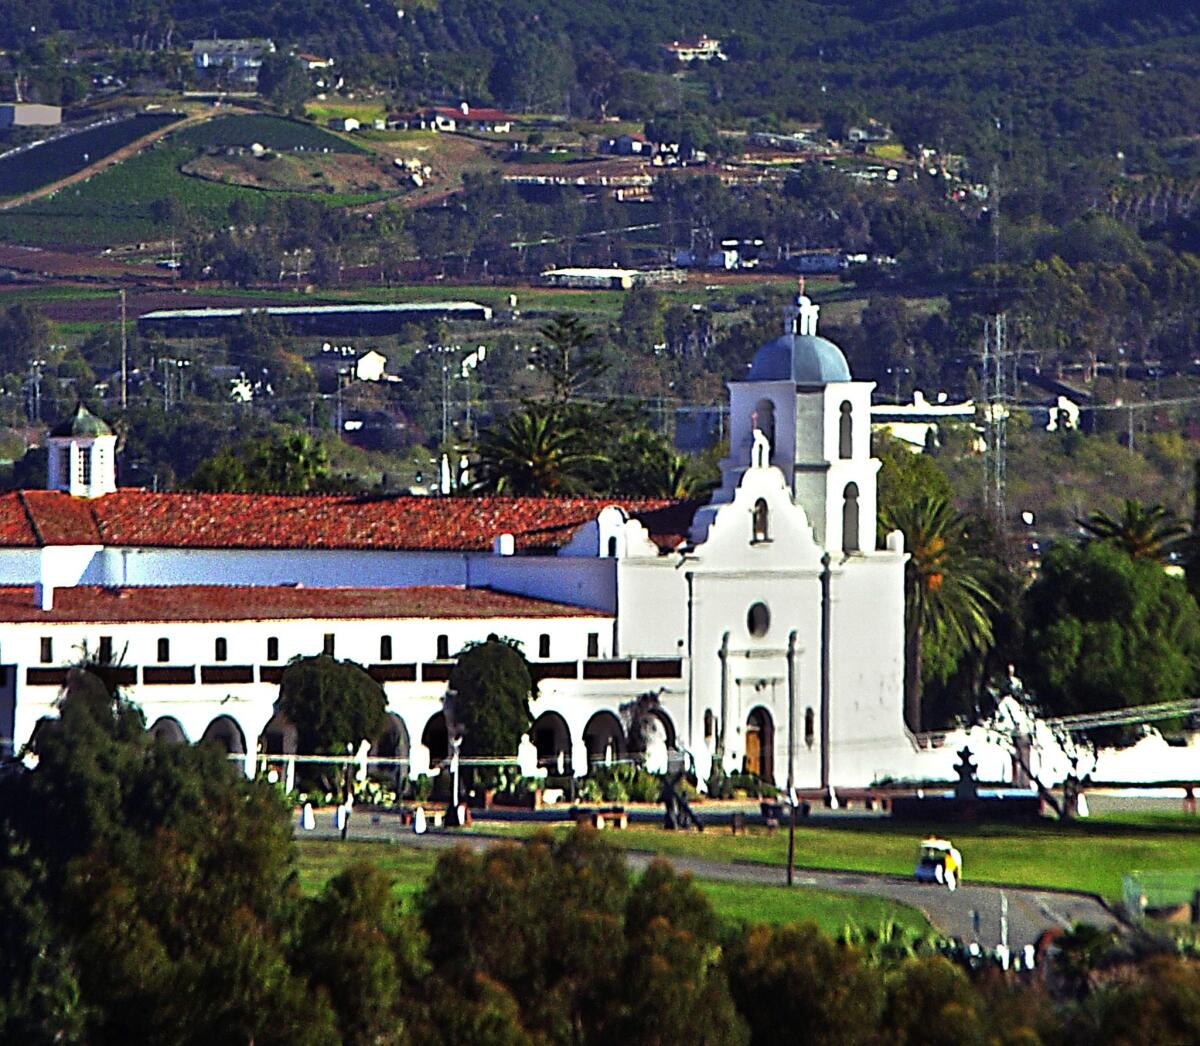 The beautiful buildings are a stunning reminder of California's mission past.